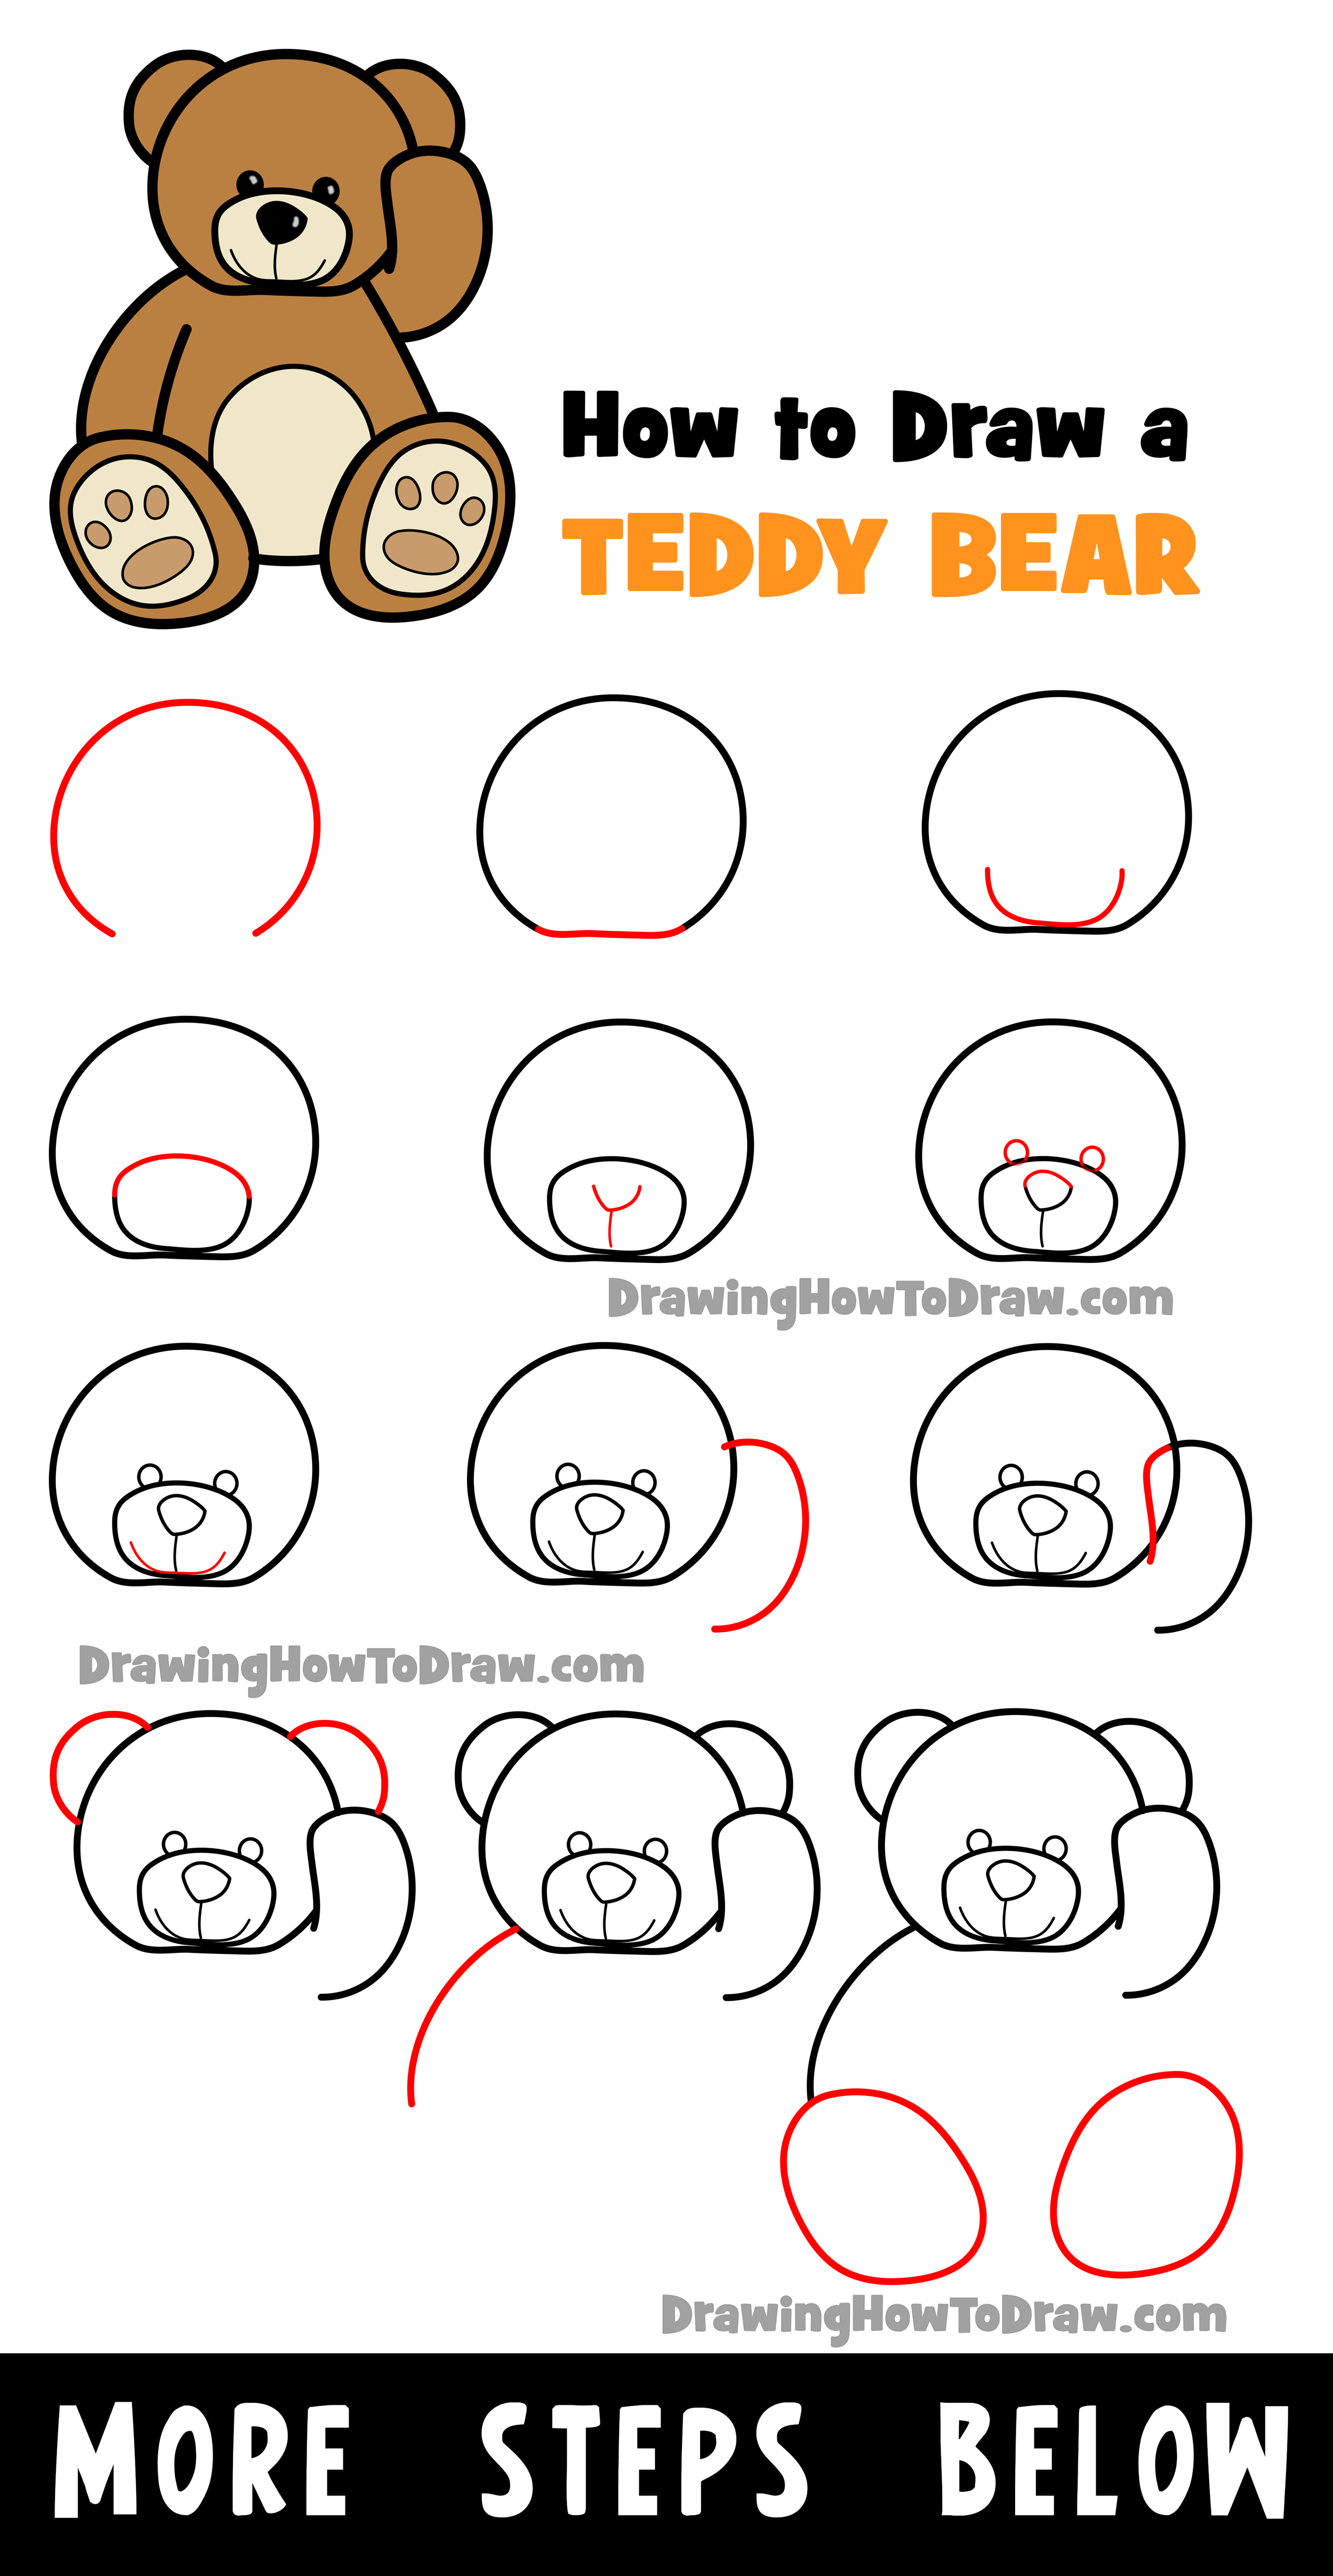 Drawing for Kids: Step-by-Step Tutorial